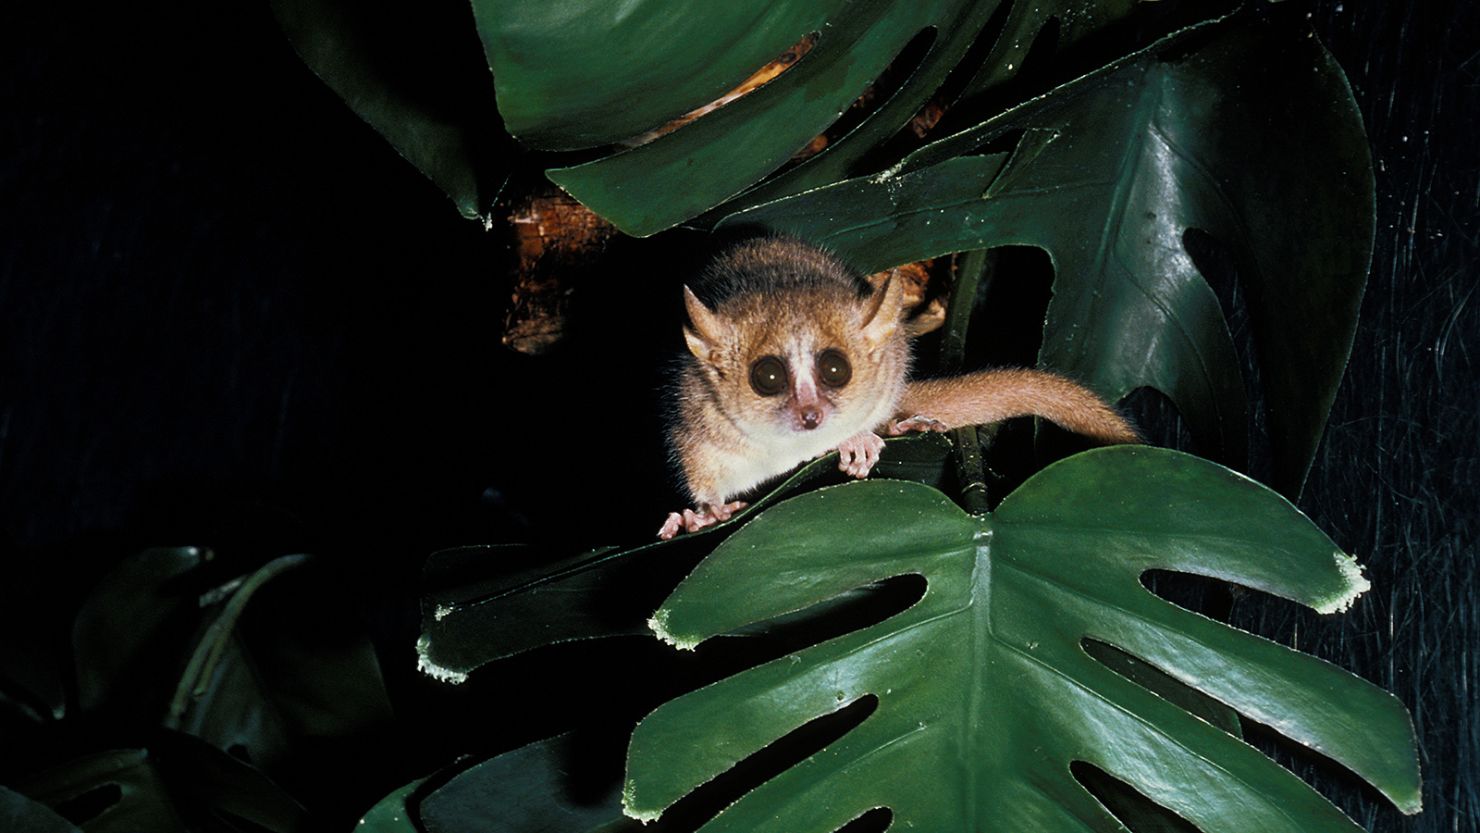 Scientists have discovered that the gray mouse lemur (Microcebus murinus) has the ability to hibernate.